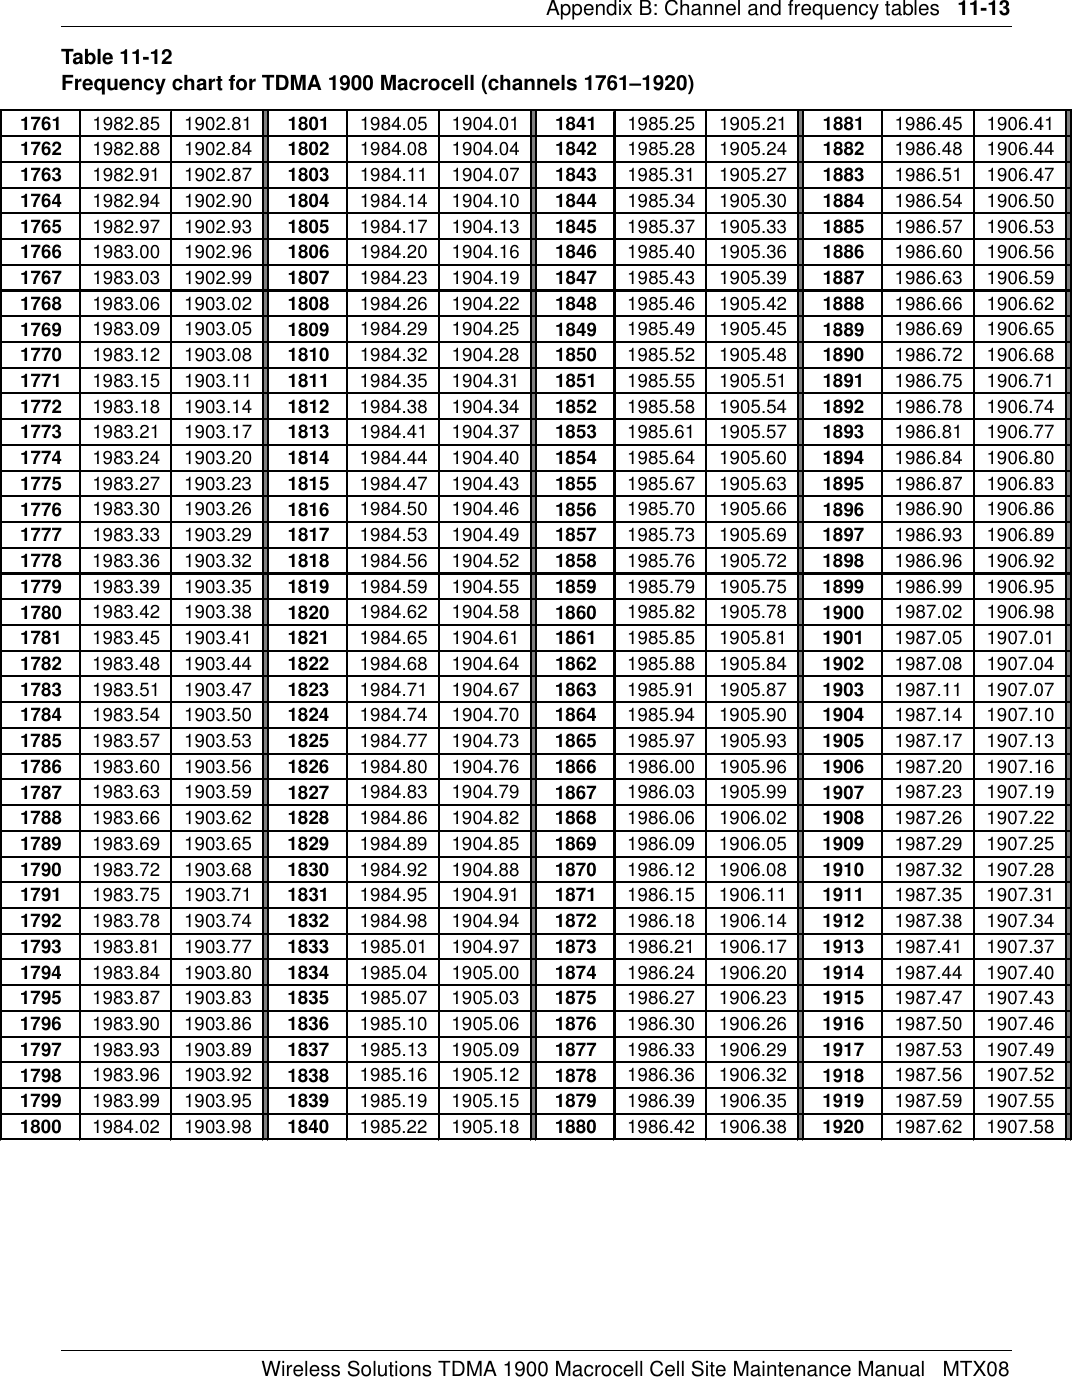 Appendix B: Channel and frequency tables   11-13Wireless Solutions TDMA 1900 Macrocell Cell Site Maintenance Manual   MTX08Table 11-12Frequency chart for TDMA 1900 Macrocell (channels 1761–1920)1761 1982.85 1902.81 1801 1984.05 1904.01 1841 1985.25 1905.21 1881 1986.45 1906.411762 1982.88 1902.84 1802 1984.08 1904.04 1842 1985.28 1905.24 1882 1986.48 1906.441763 1982.91 1902.87 1803 1984.11 1904.07 1843 1985.31 1905.27 1883 1986.51 1906.471764 1982.94 1902.90 1804 1984.14 1904.10 1844 1985.34 1905.30 1884 1986.54 1906.501765 1982.97 1902.93 1805 1984.17 1904.13 1845 1985.37 1905.33 1885 1986.57 1906.531766 1983.00 1902.96 1806 1984.20 1904.16 1846 1985.40 1905.36 1886 1986.60 1906.561767 1983.03 1902.99 1807 1984.23 1904.19 1847 1985.43 1905.39 1887 1986.63 1906.591768 1983.06 1903.02 1808 1984.26 1904.22 1848 1985.46 1905.42 1888 1986.66 1906.621769 1983.09 1903.05 1809 1984.29 1904.25 1849 1985.49 1905.45 1889 1986.69 1906.651770 1983.12 1903.08 1810 1984.32 1904.28 1850 1985.52 1905.48 1890 1986.72 1906.681771 1983.15 1903.11 1811 1984.35 1904.31 1851 1985.55 1905.51 1891 1986.75 1906.711772 1983.18 1903.14 1812 1984.38 1904.34 1852 1985.58 1905.54 1892 1986.78 1906.741773 1983.21 1903.17 1813 1984.41 1904.37 1853 1985.61 1905.57 1893 1986.81 1906.771774 1983.24 1903.20 1814 1984.44 1904.40 1854 1985.64 1905.60 1894 1986.84 1906.801775 1983.27 1903.23 1815 1984.47 1904.43 1855 1985.67 1905.63 1895 1986.87 1906.831776 1983.30 1903.26 1816 1984.50 1904.46 1856 1985.70 1905.66 1896 1986.90 1906.861777 1983.33 1903.29 1817 1984.53 1904.49 1857 1985.73 1905.69 1897 1986.93 1906.891778 1983.36 1903.32 1818 1984.56 1904.52 1858 1985.76 1905.72 1898 1986.96 1906.921779 1983.39 1903.35 1819 1984.59 1904.55 1859 1985.79 1905.75 1899 1986.99 1906.951780 1983.42 1903.38 1820 1984.62 1904.58 1860 1985.82 1905.78 1900 1987.02 1906.981781 1983.45 1903.41 1821 1984.65 1904.61 1861 1985.85 1905.81 1901 1987.05 1907.011782 1983.48 1903.44 1822 1984.68 1904.64 1862 1985.88 1905.84 1902 1987.08 1907.041783 1983.51 1903.47 1823 1984.71 1904.67 1863 1985.91 1905.87 1903 1987.11 1907.071784 1983.54 1903.50 1824 1984.74 1904.70 1864 1985.94 1905.90 1904 1987.14 1907.101785 1983.57 1903.53 1825 1984.77 1904.73 1865 1985.97 1905.93 1905 1987.17 1907.131786 1983.60 1903.56 1826 1984.80 1904.76 1866 1986.00 1905.96 1906 1987.20 1907.161787 1983.63 1903.59 1827 1984.83 1904.79 1867 1986.03 1905.99 1907 1987.23 1907.191788 1983.66 1903.62 1828 1984.86 1904.82 1868 1986.06 1906.02 1908 1987.26 1907.221789 1983.69 1903.65 1829 1984.89 1904.85 1869 1986.09 1906.05 1909 1987.29 1907.251790 1983.72 1903.68 1830 1984.92 1904.88 1870 1986.12 1906.08 1910 1987.32 1907.281791 1983.75 1903.71 1831 1984.95 1904.91 1871 1986.15 1906.11 1911 1987.35 1907.311792 1983.78 1903.74 1832 1984.98 1904.94 1872 1986.18 1906.14 1912 1987.38 1907.341793 1983.81 1903.77 1833 1985.01 1904.97 1873 1986.21 1906.17 1913 1987.41 1907.371794 1983.84 1903.80 1834 1985.04 1905.00 1874 1986.24 1906.20 1914 1987.44 1907.401795 1983.87 1903.83 1835 1985.07 1905.03 1875 1986.27 1906.23 1915 1987.47 1907.431796 1983.90 1903.86 1836 1985.10 1905.06 1876 1986.30 1906.26 1916 1987.50 1907.461797 1983.93 1903.89 1837 1985.13 1905.09 1877 1986.33 1906.29 1917 1987.53 1907.491798 1983.96 1903.92 1838 1985.16 1905.12 1878 1986.36 1906.32 1918 1987.56 1907.521799 1983.99 1903.95 1839 1985.19 1905.15 1879 1986.39 1906.35 1919 1987.59 1907.551800 1984.02 1903.98 1840 1985.22 1905.18 1880 1986.42 1906.38 1920 1987.62 1907.58